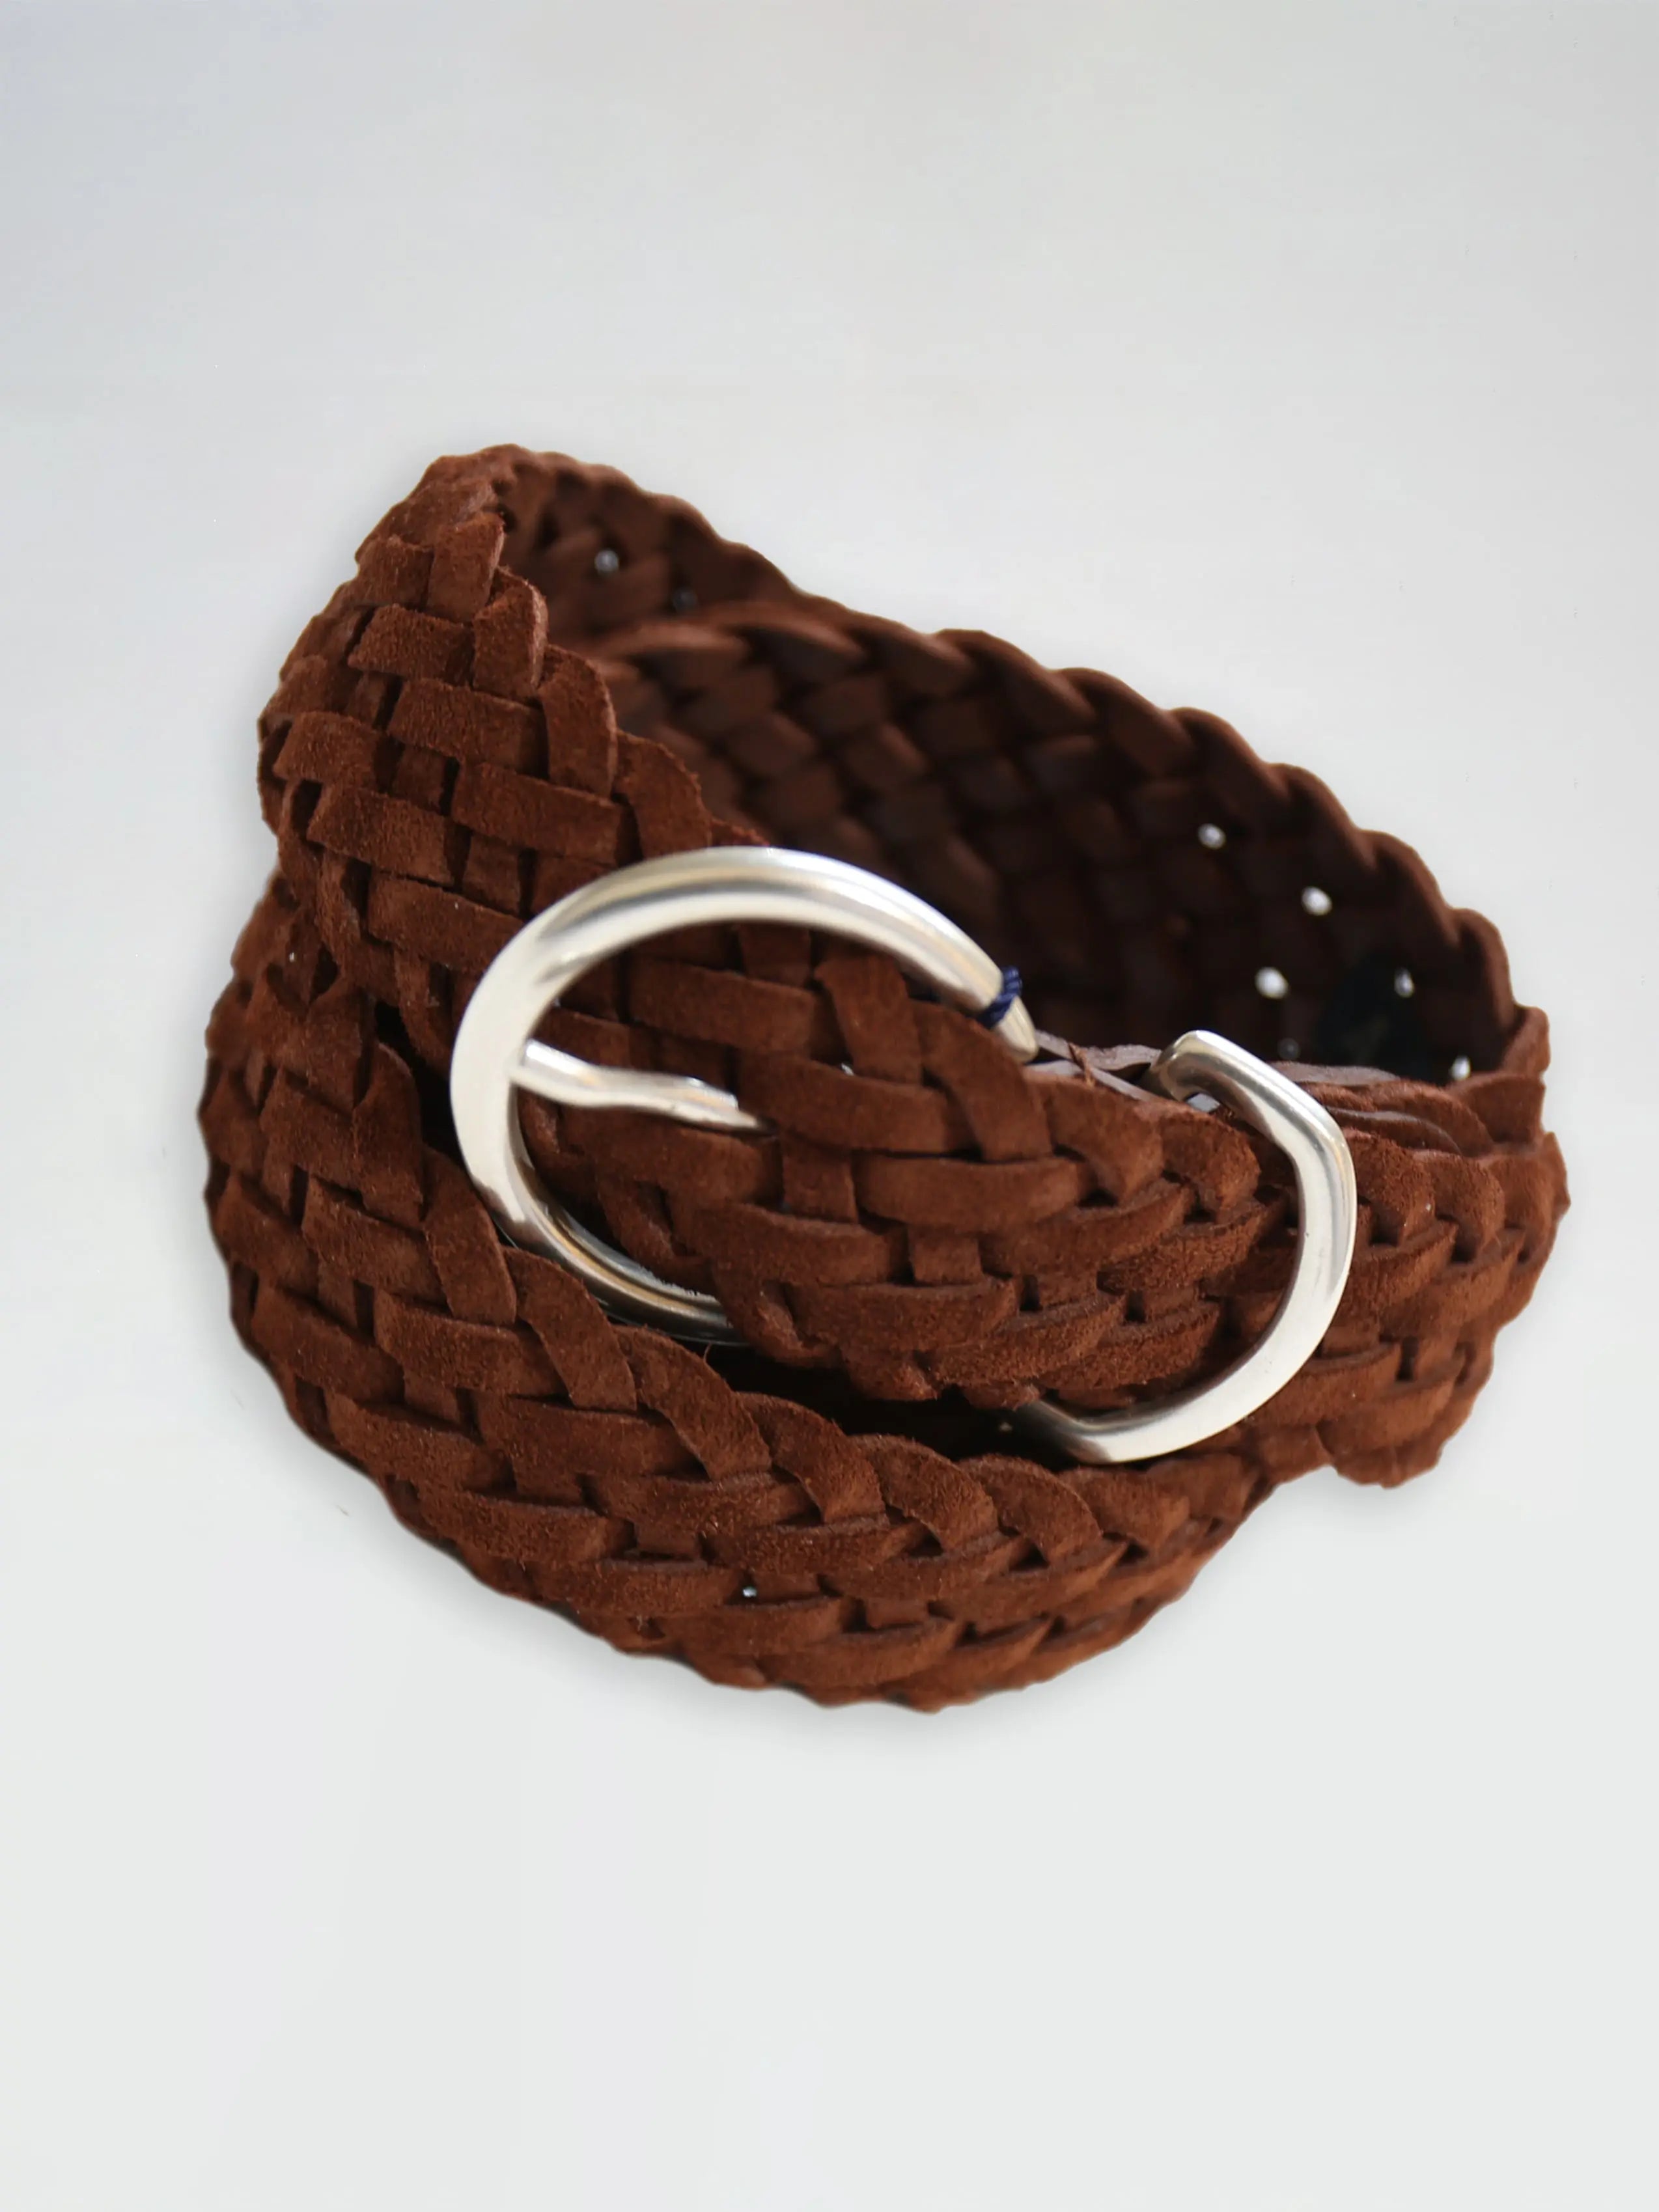 Andersons, Woven Leather Belt